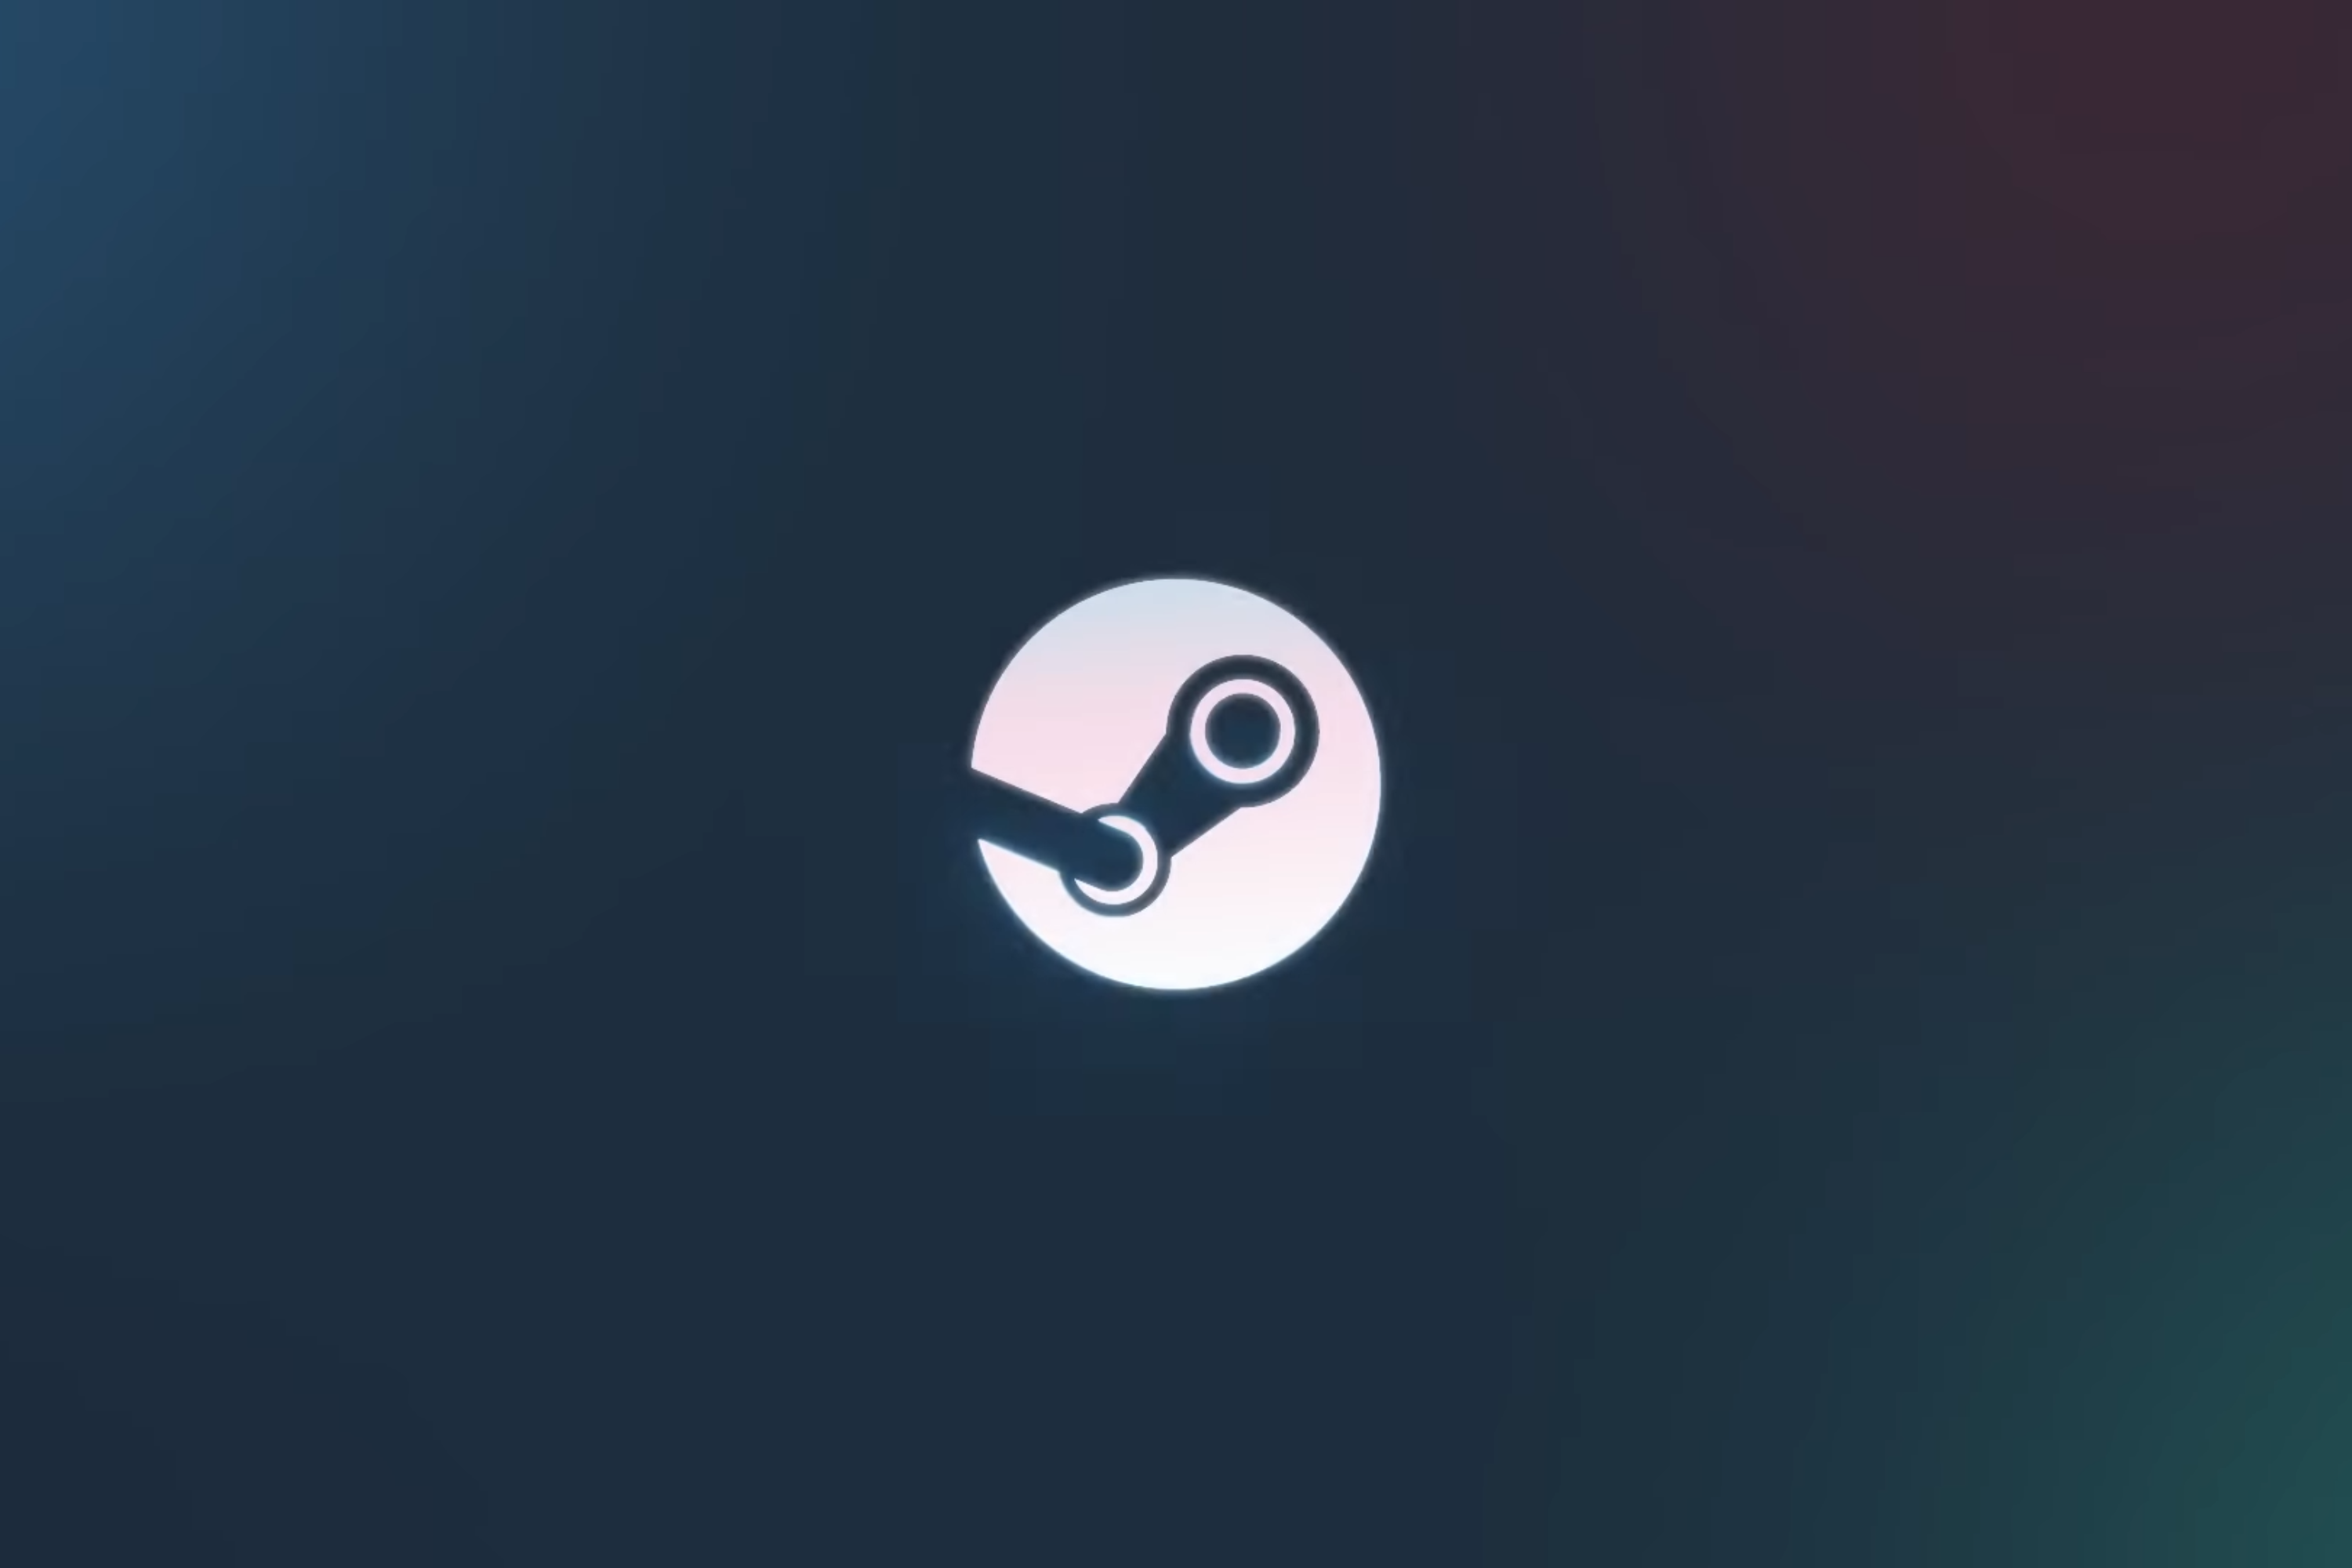 Steam gets massive overhaul that brings updated visuals and exciting new features